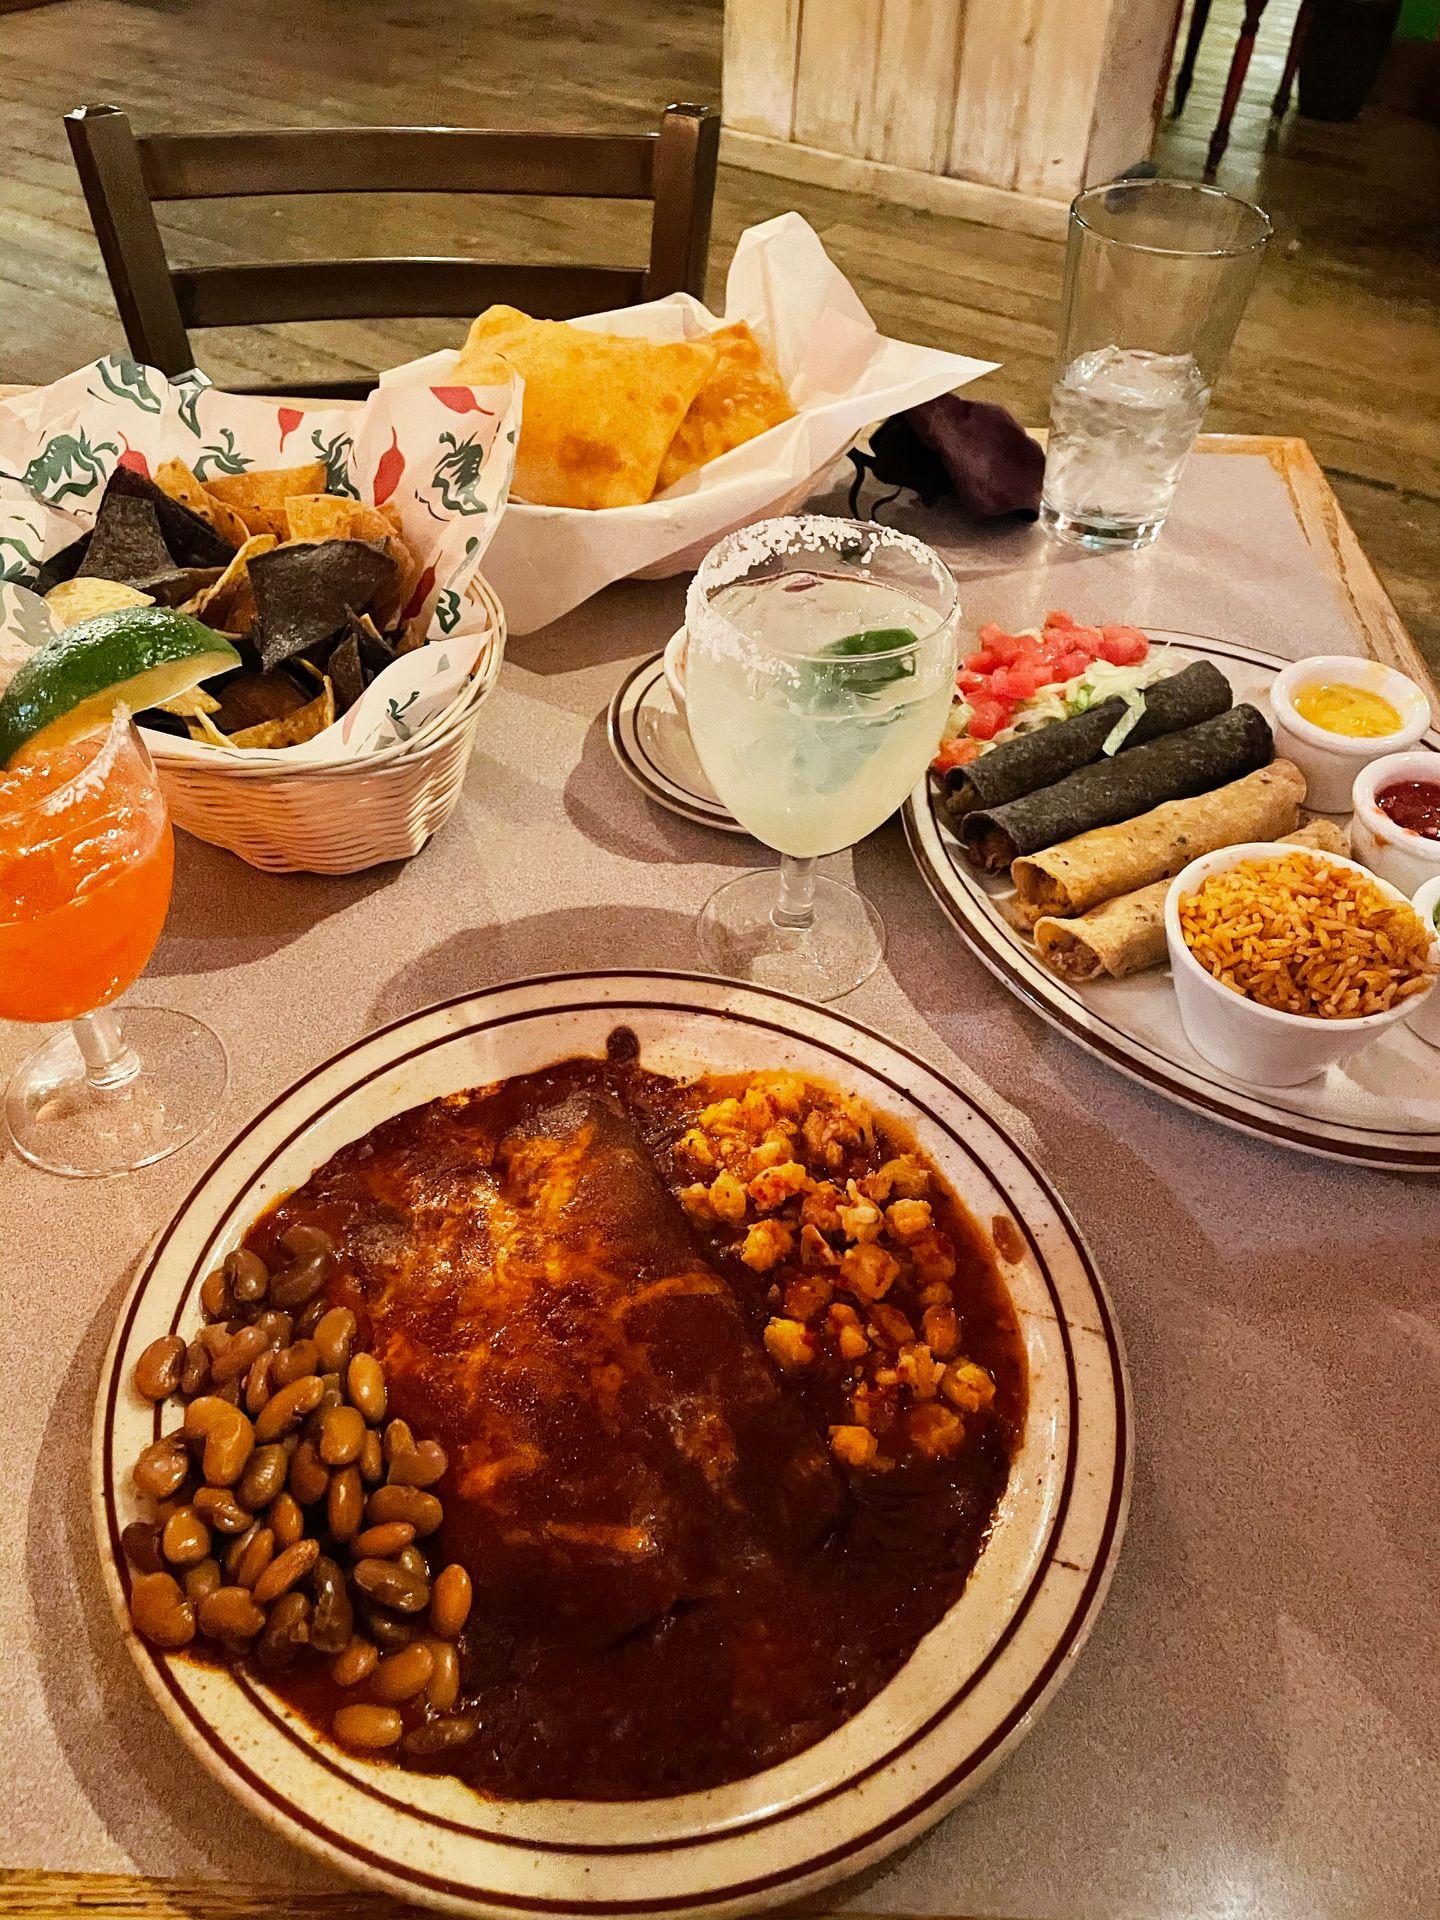 A table with enchiladas, margaritas, chips and other dishes from La Choza.